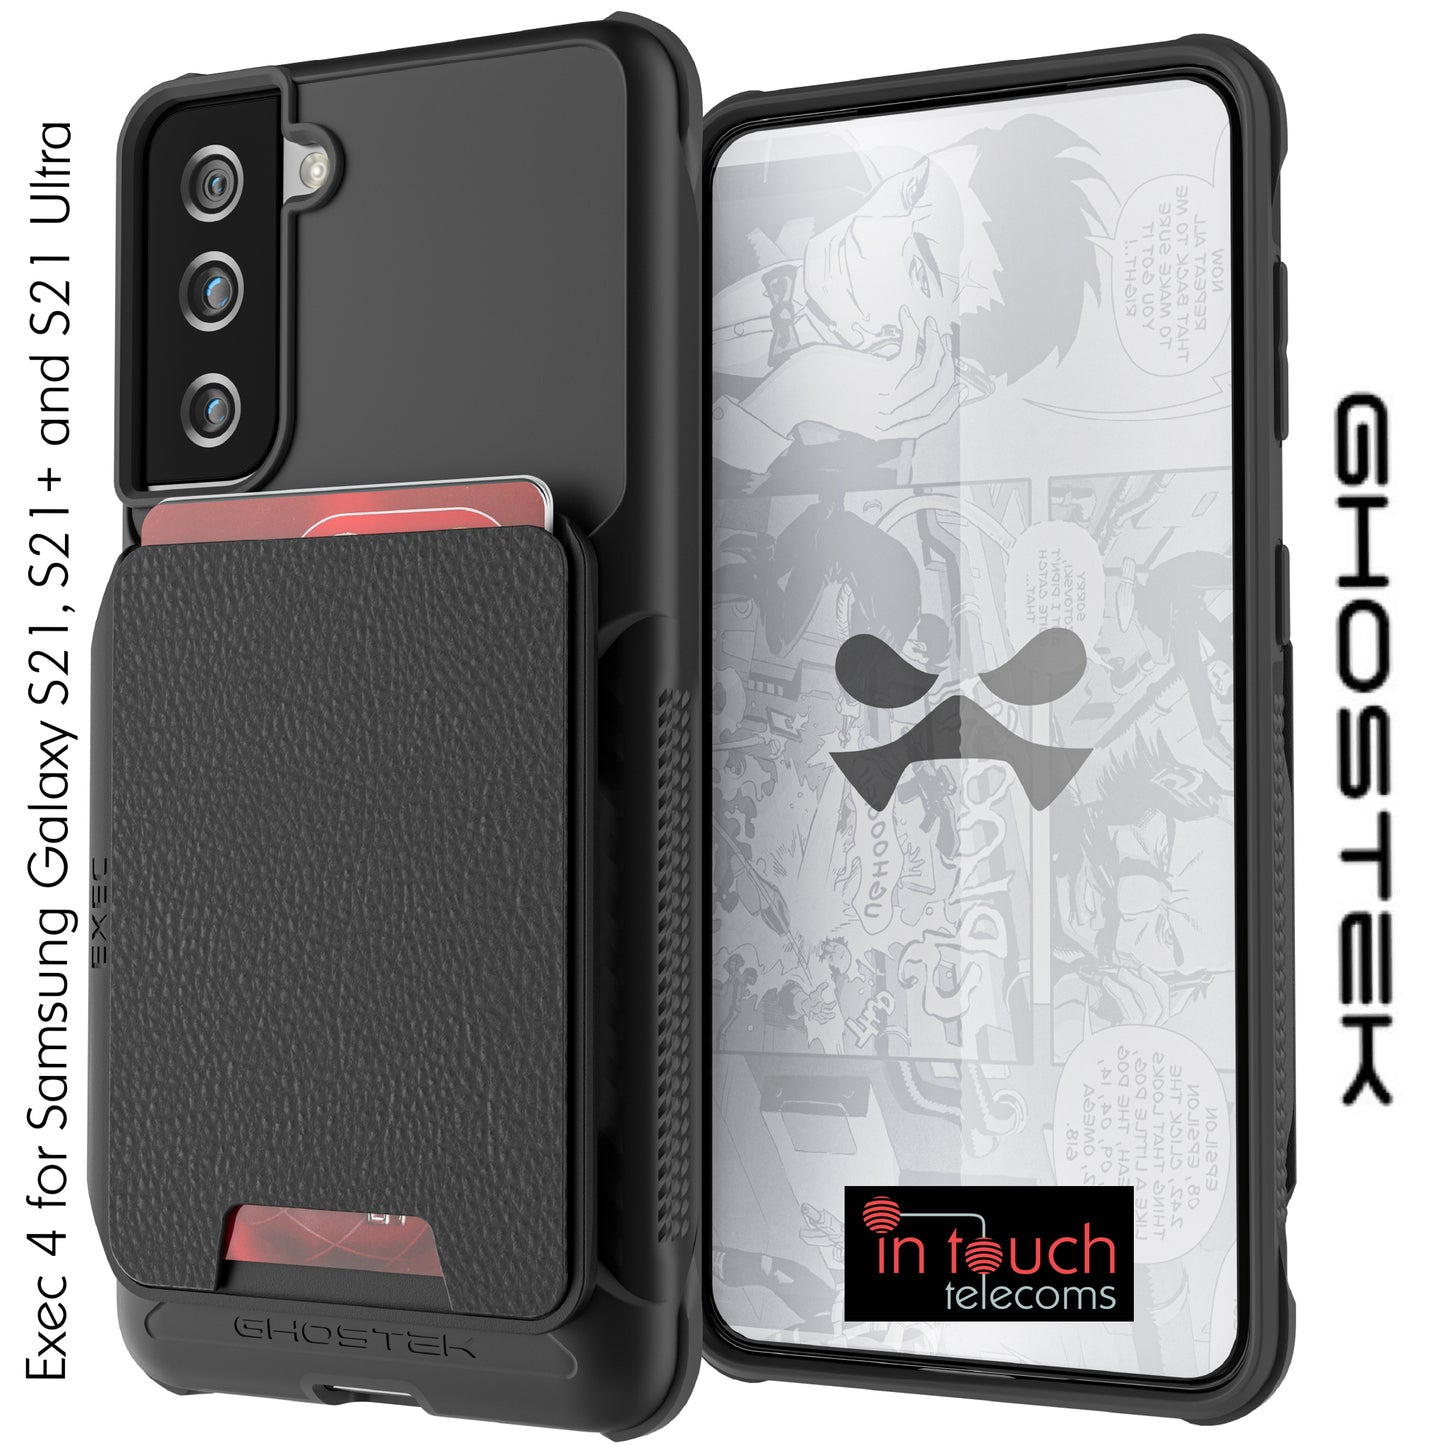 Ghostek Exec 4 Case for Samsung Galaxy S21 Ultra (5G) | Military Grade